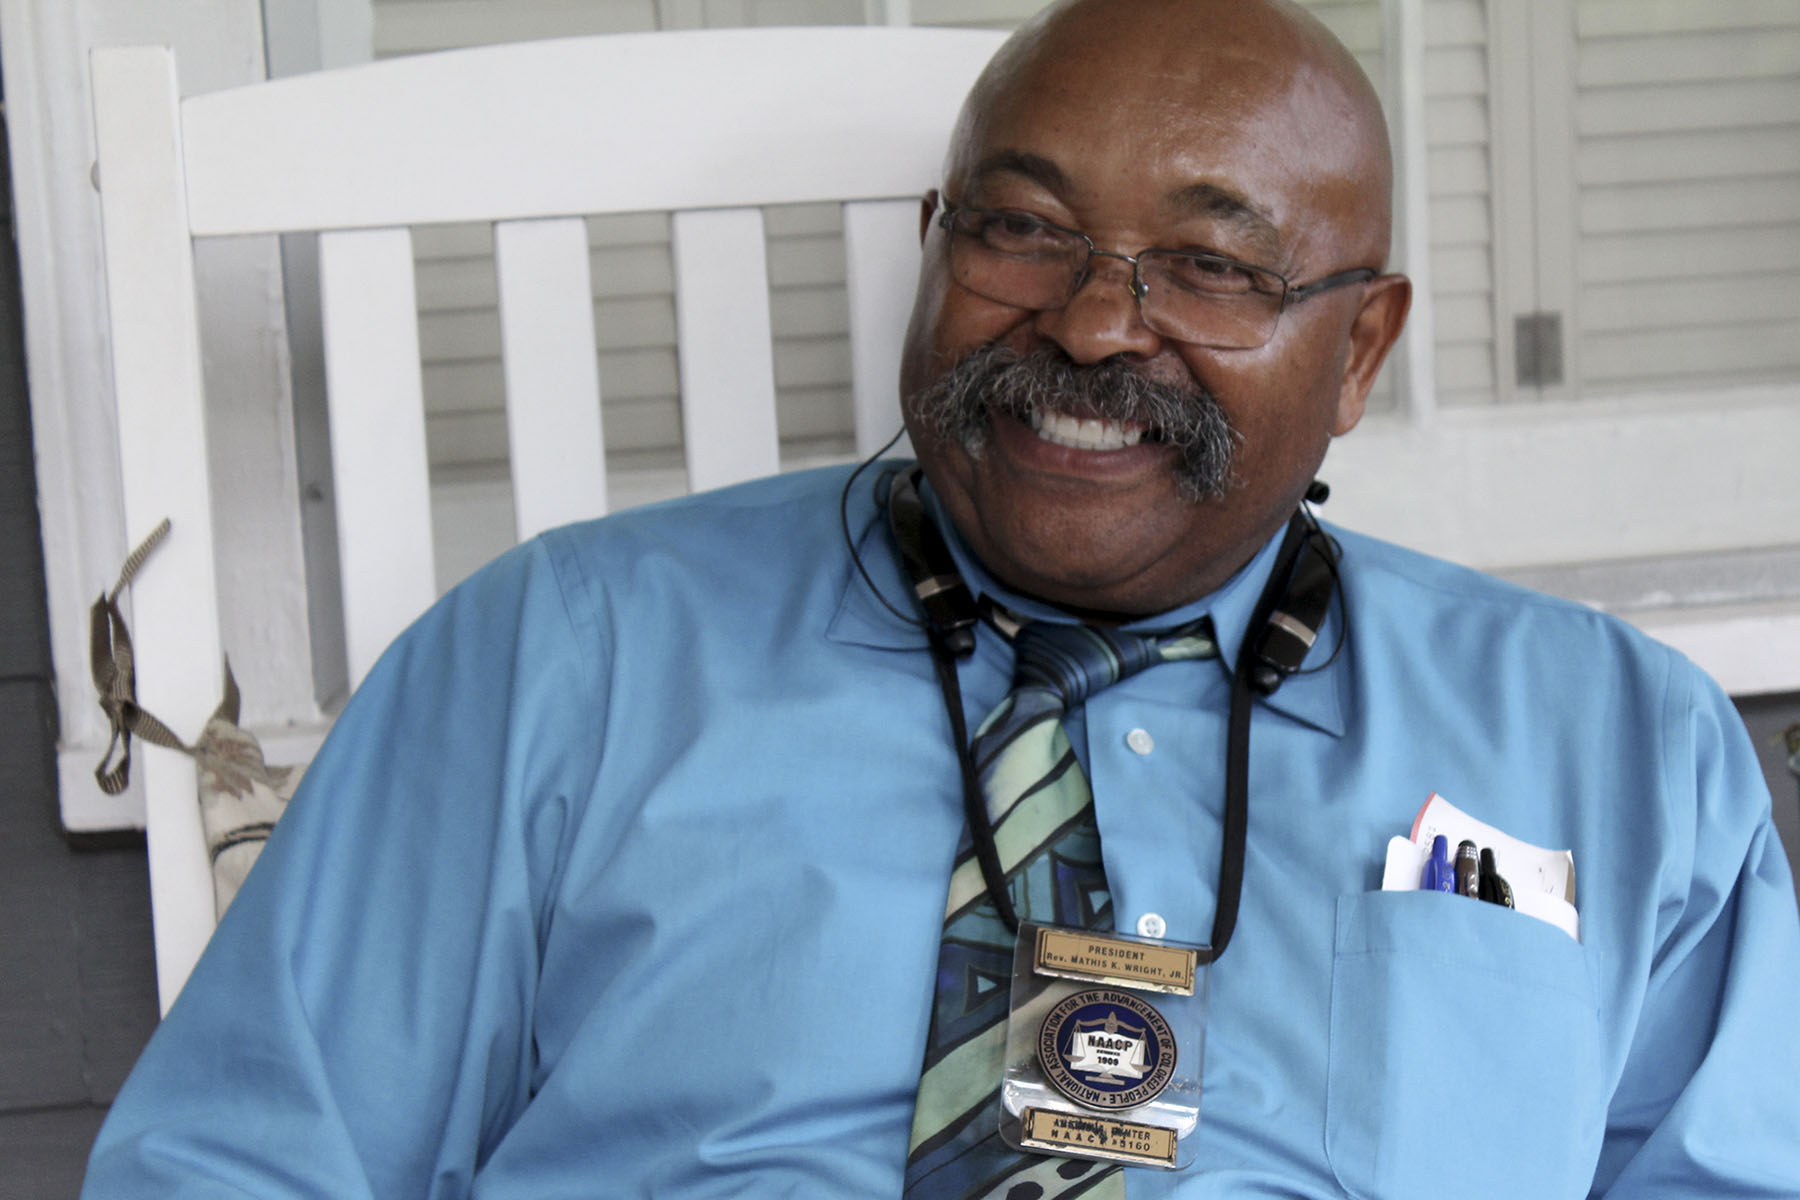 The Rev. Mathis Wright is the Sumter County NAACP president and a plaintiff in the Wright v. Sumter County lawsuit, which claims at-large elections could prevent African-Americans from being represented equally. (Phillip Jackson/News21)